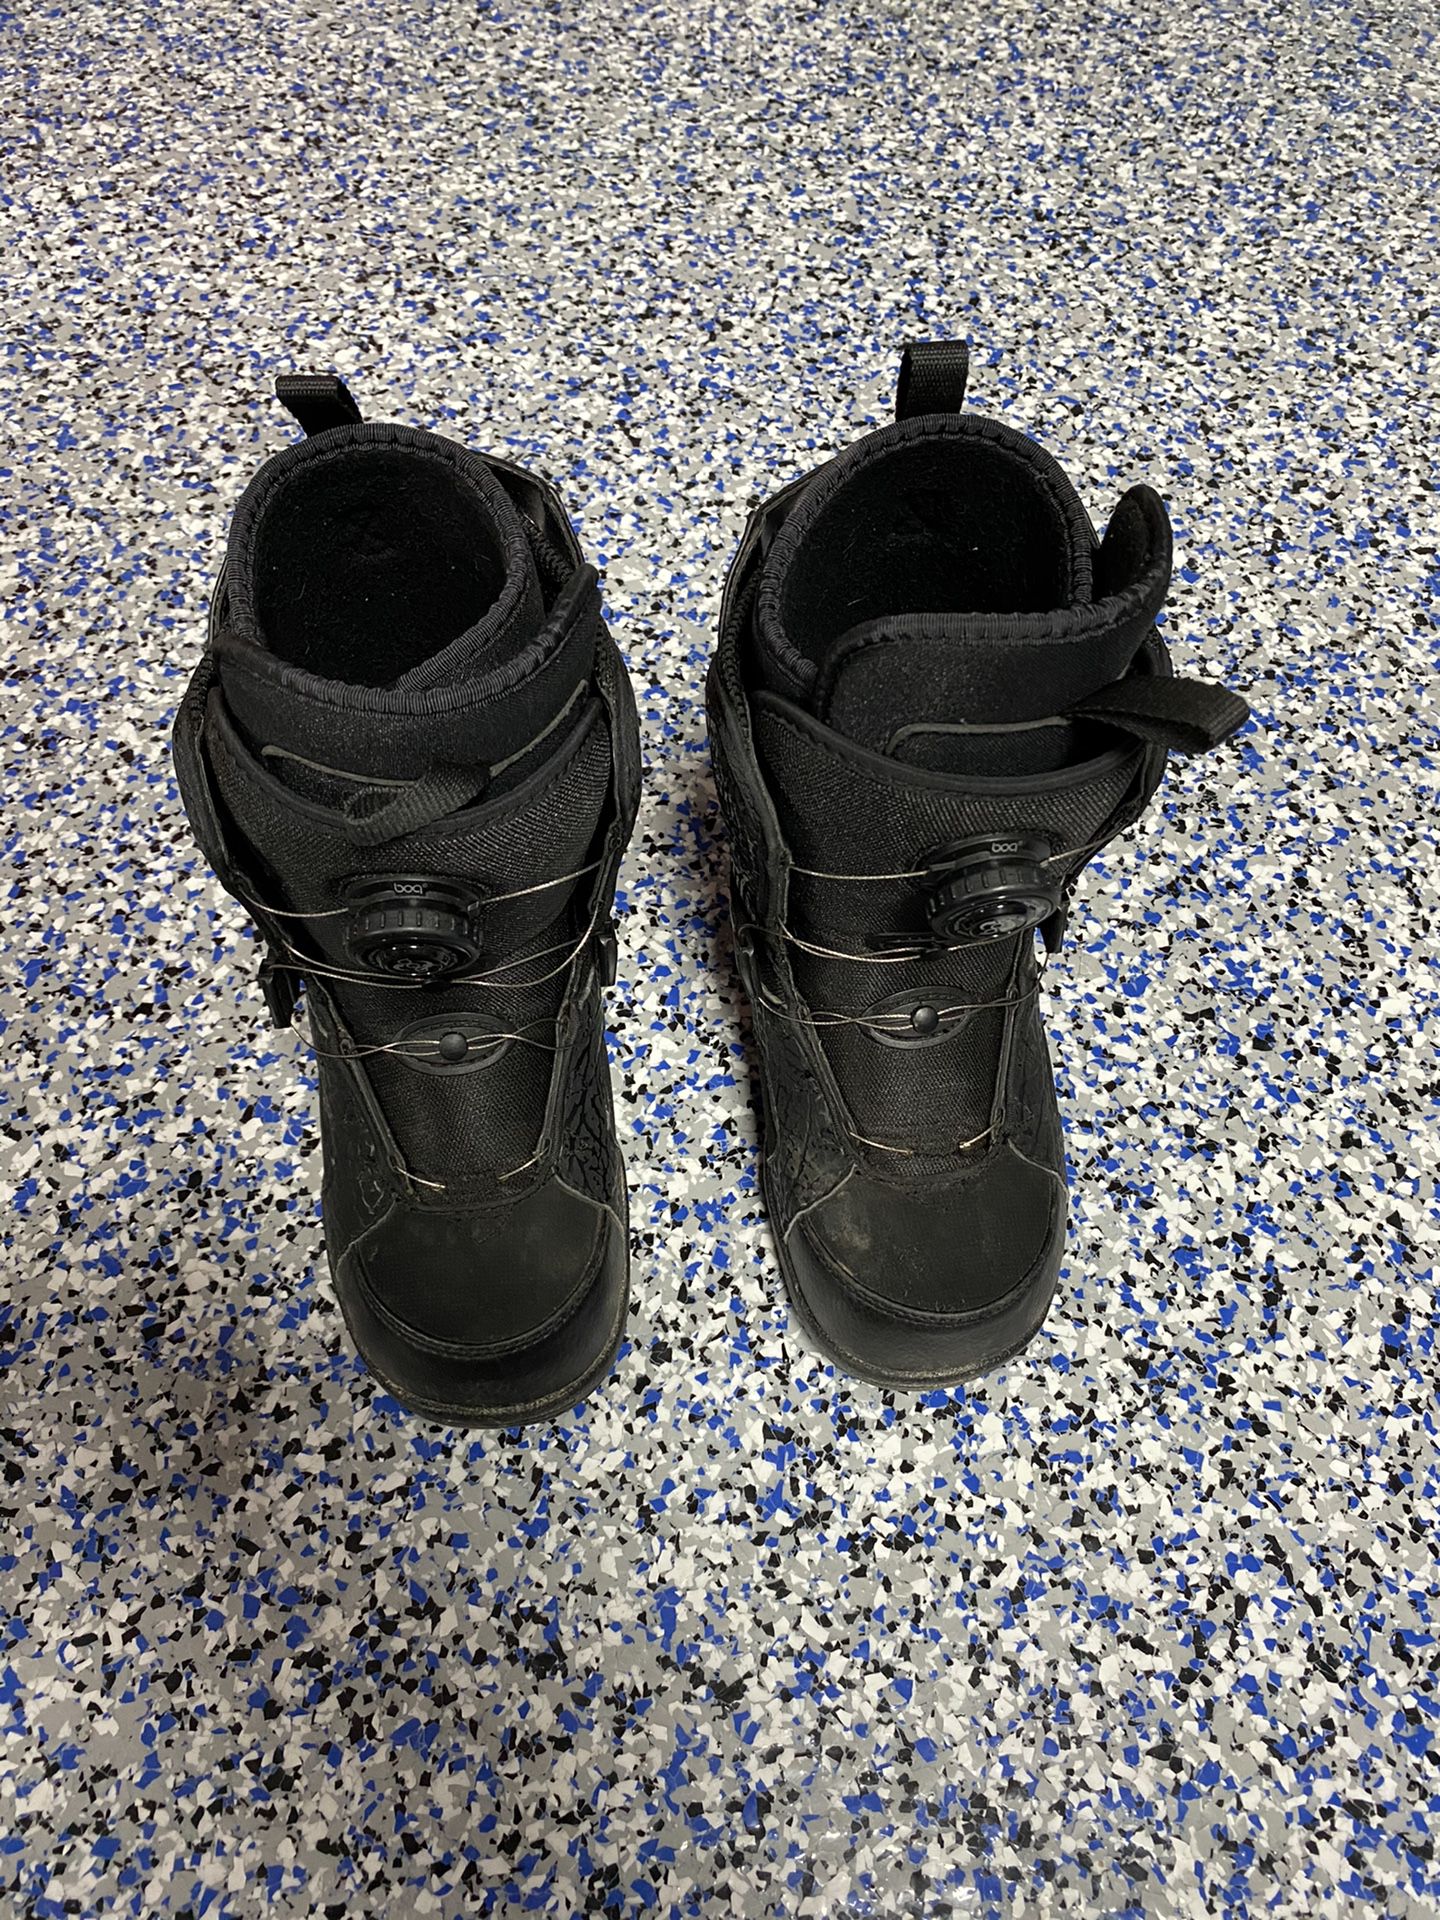 Snow Boarding Boots Kids Size 5 Like New!